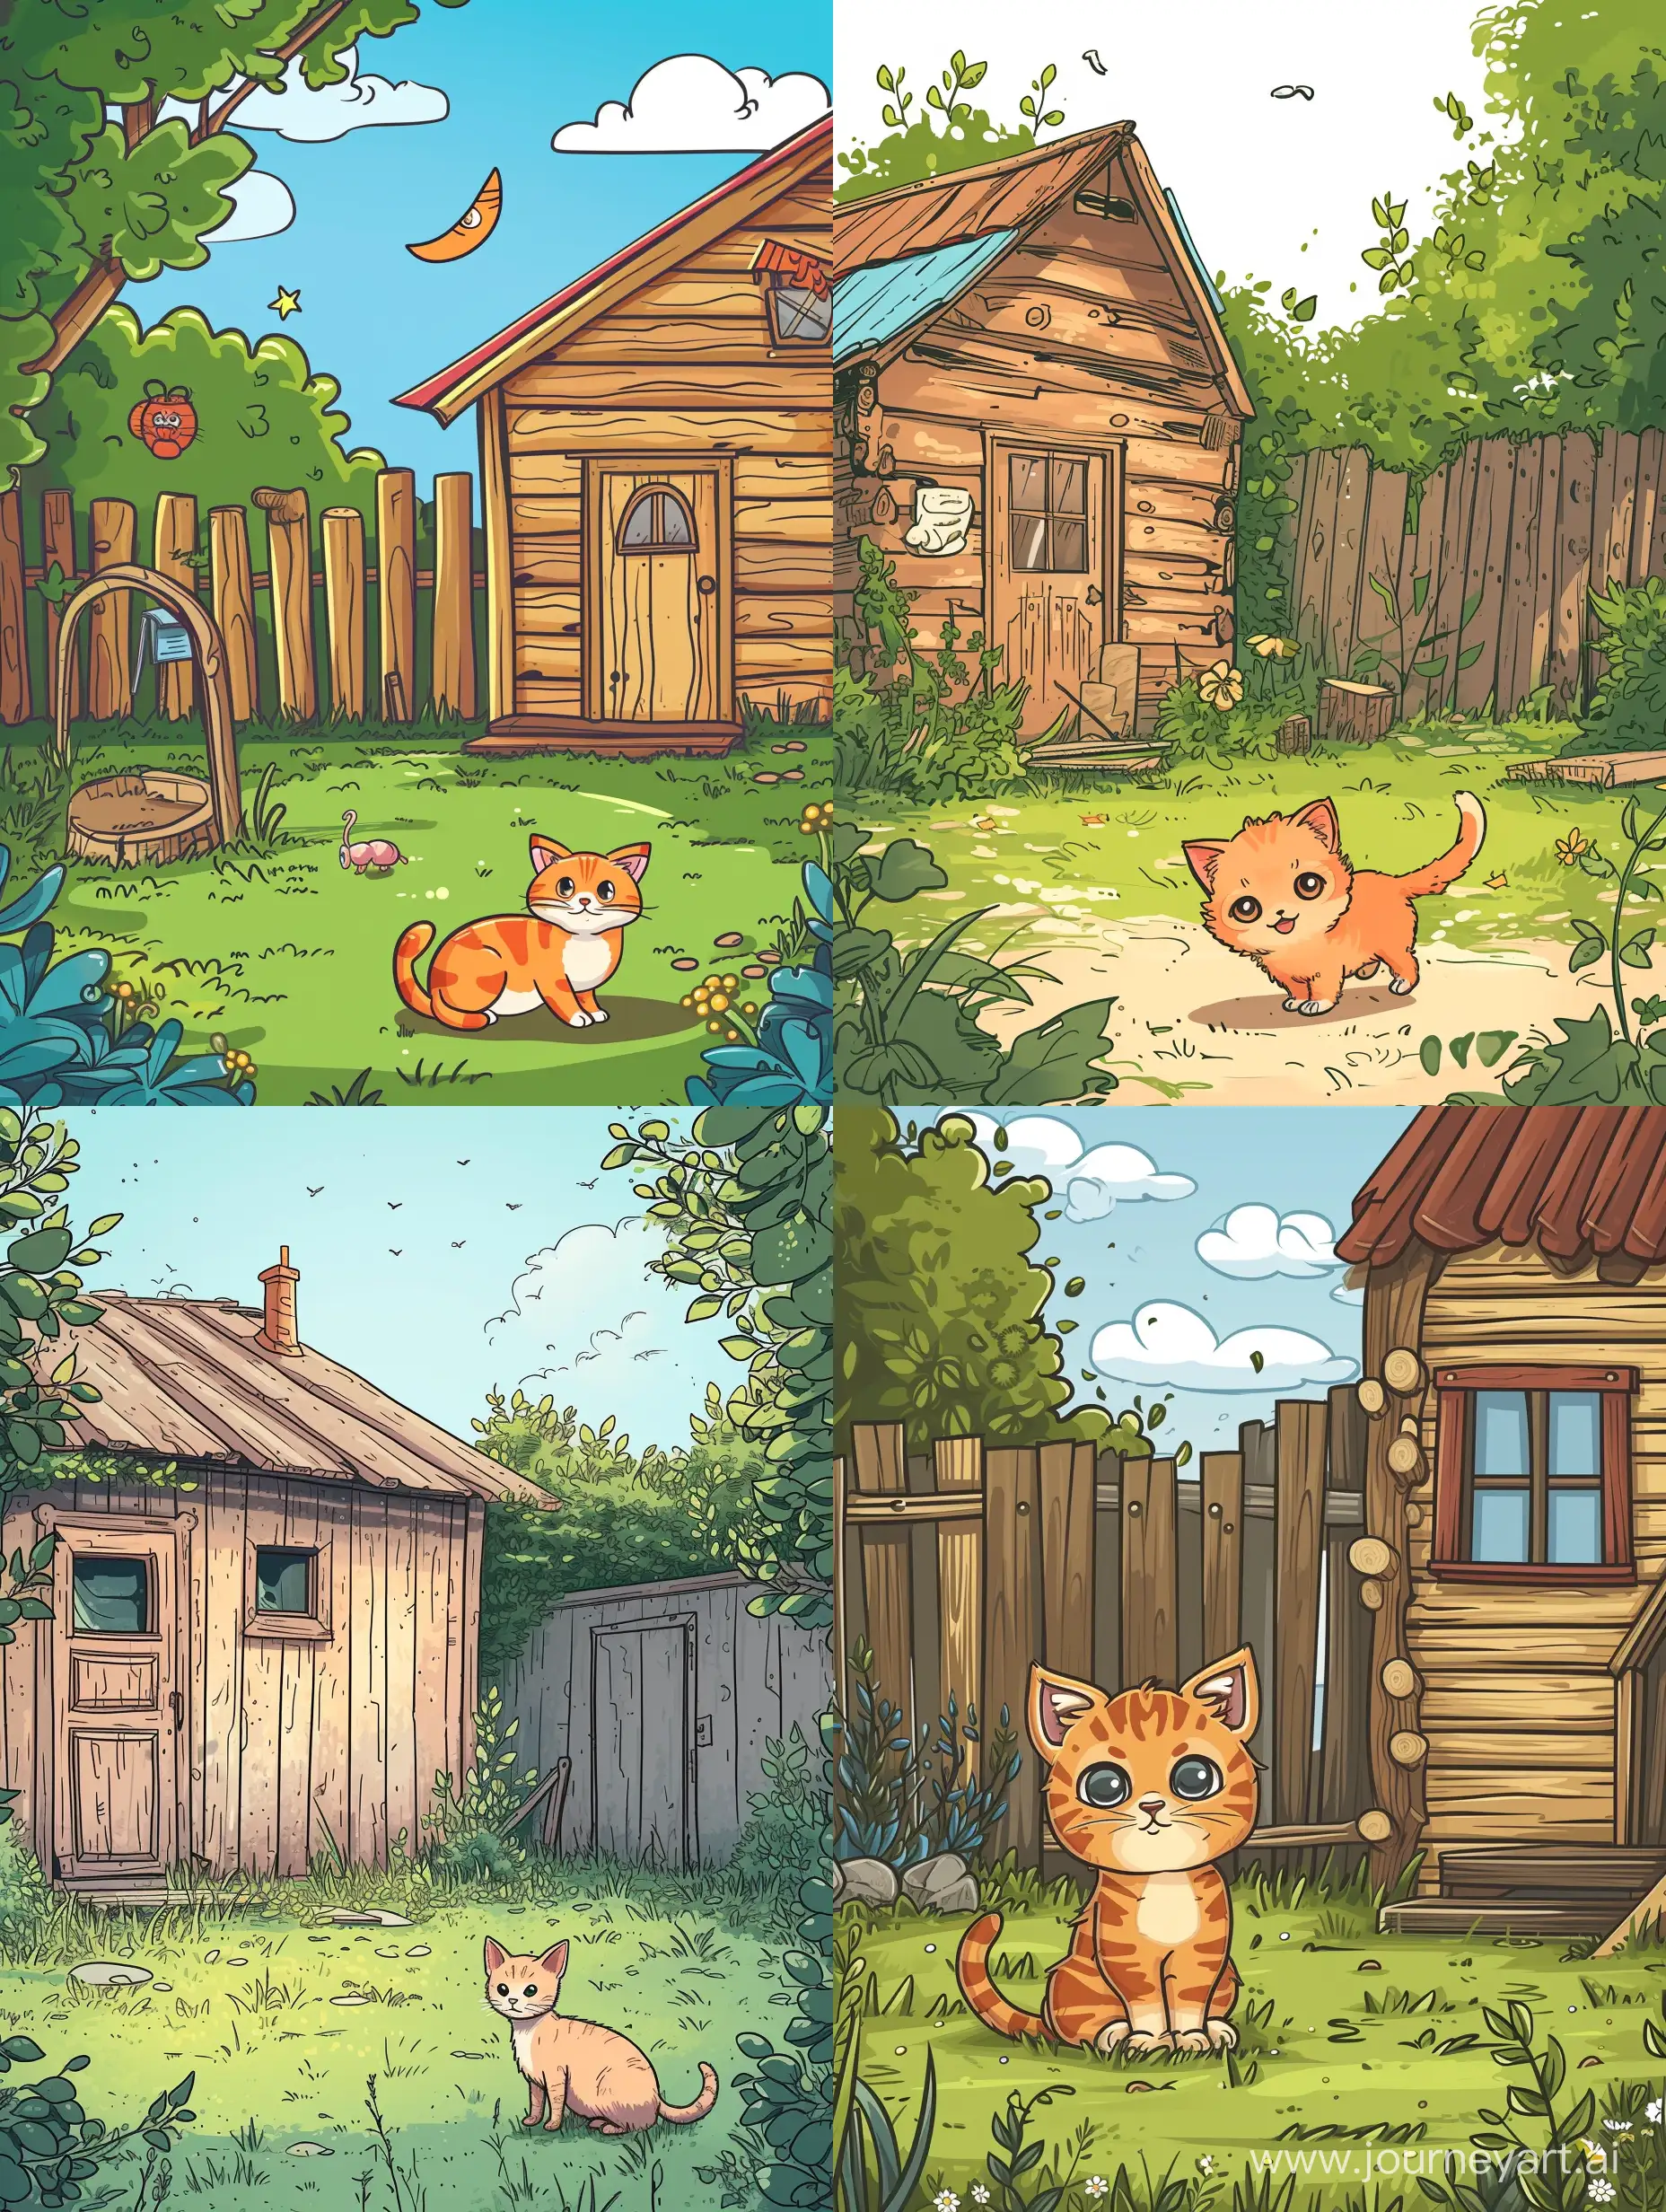 Adorable-Cartoon-Kitten-Playing-in-Wooden-House-Yard